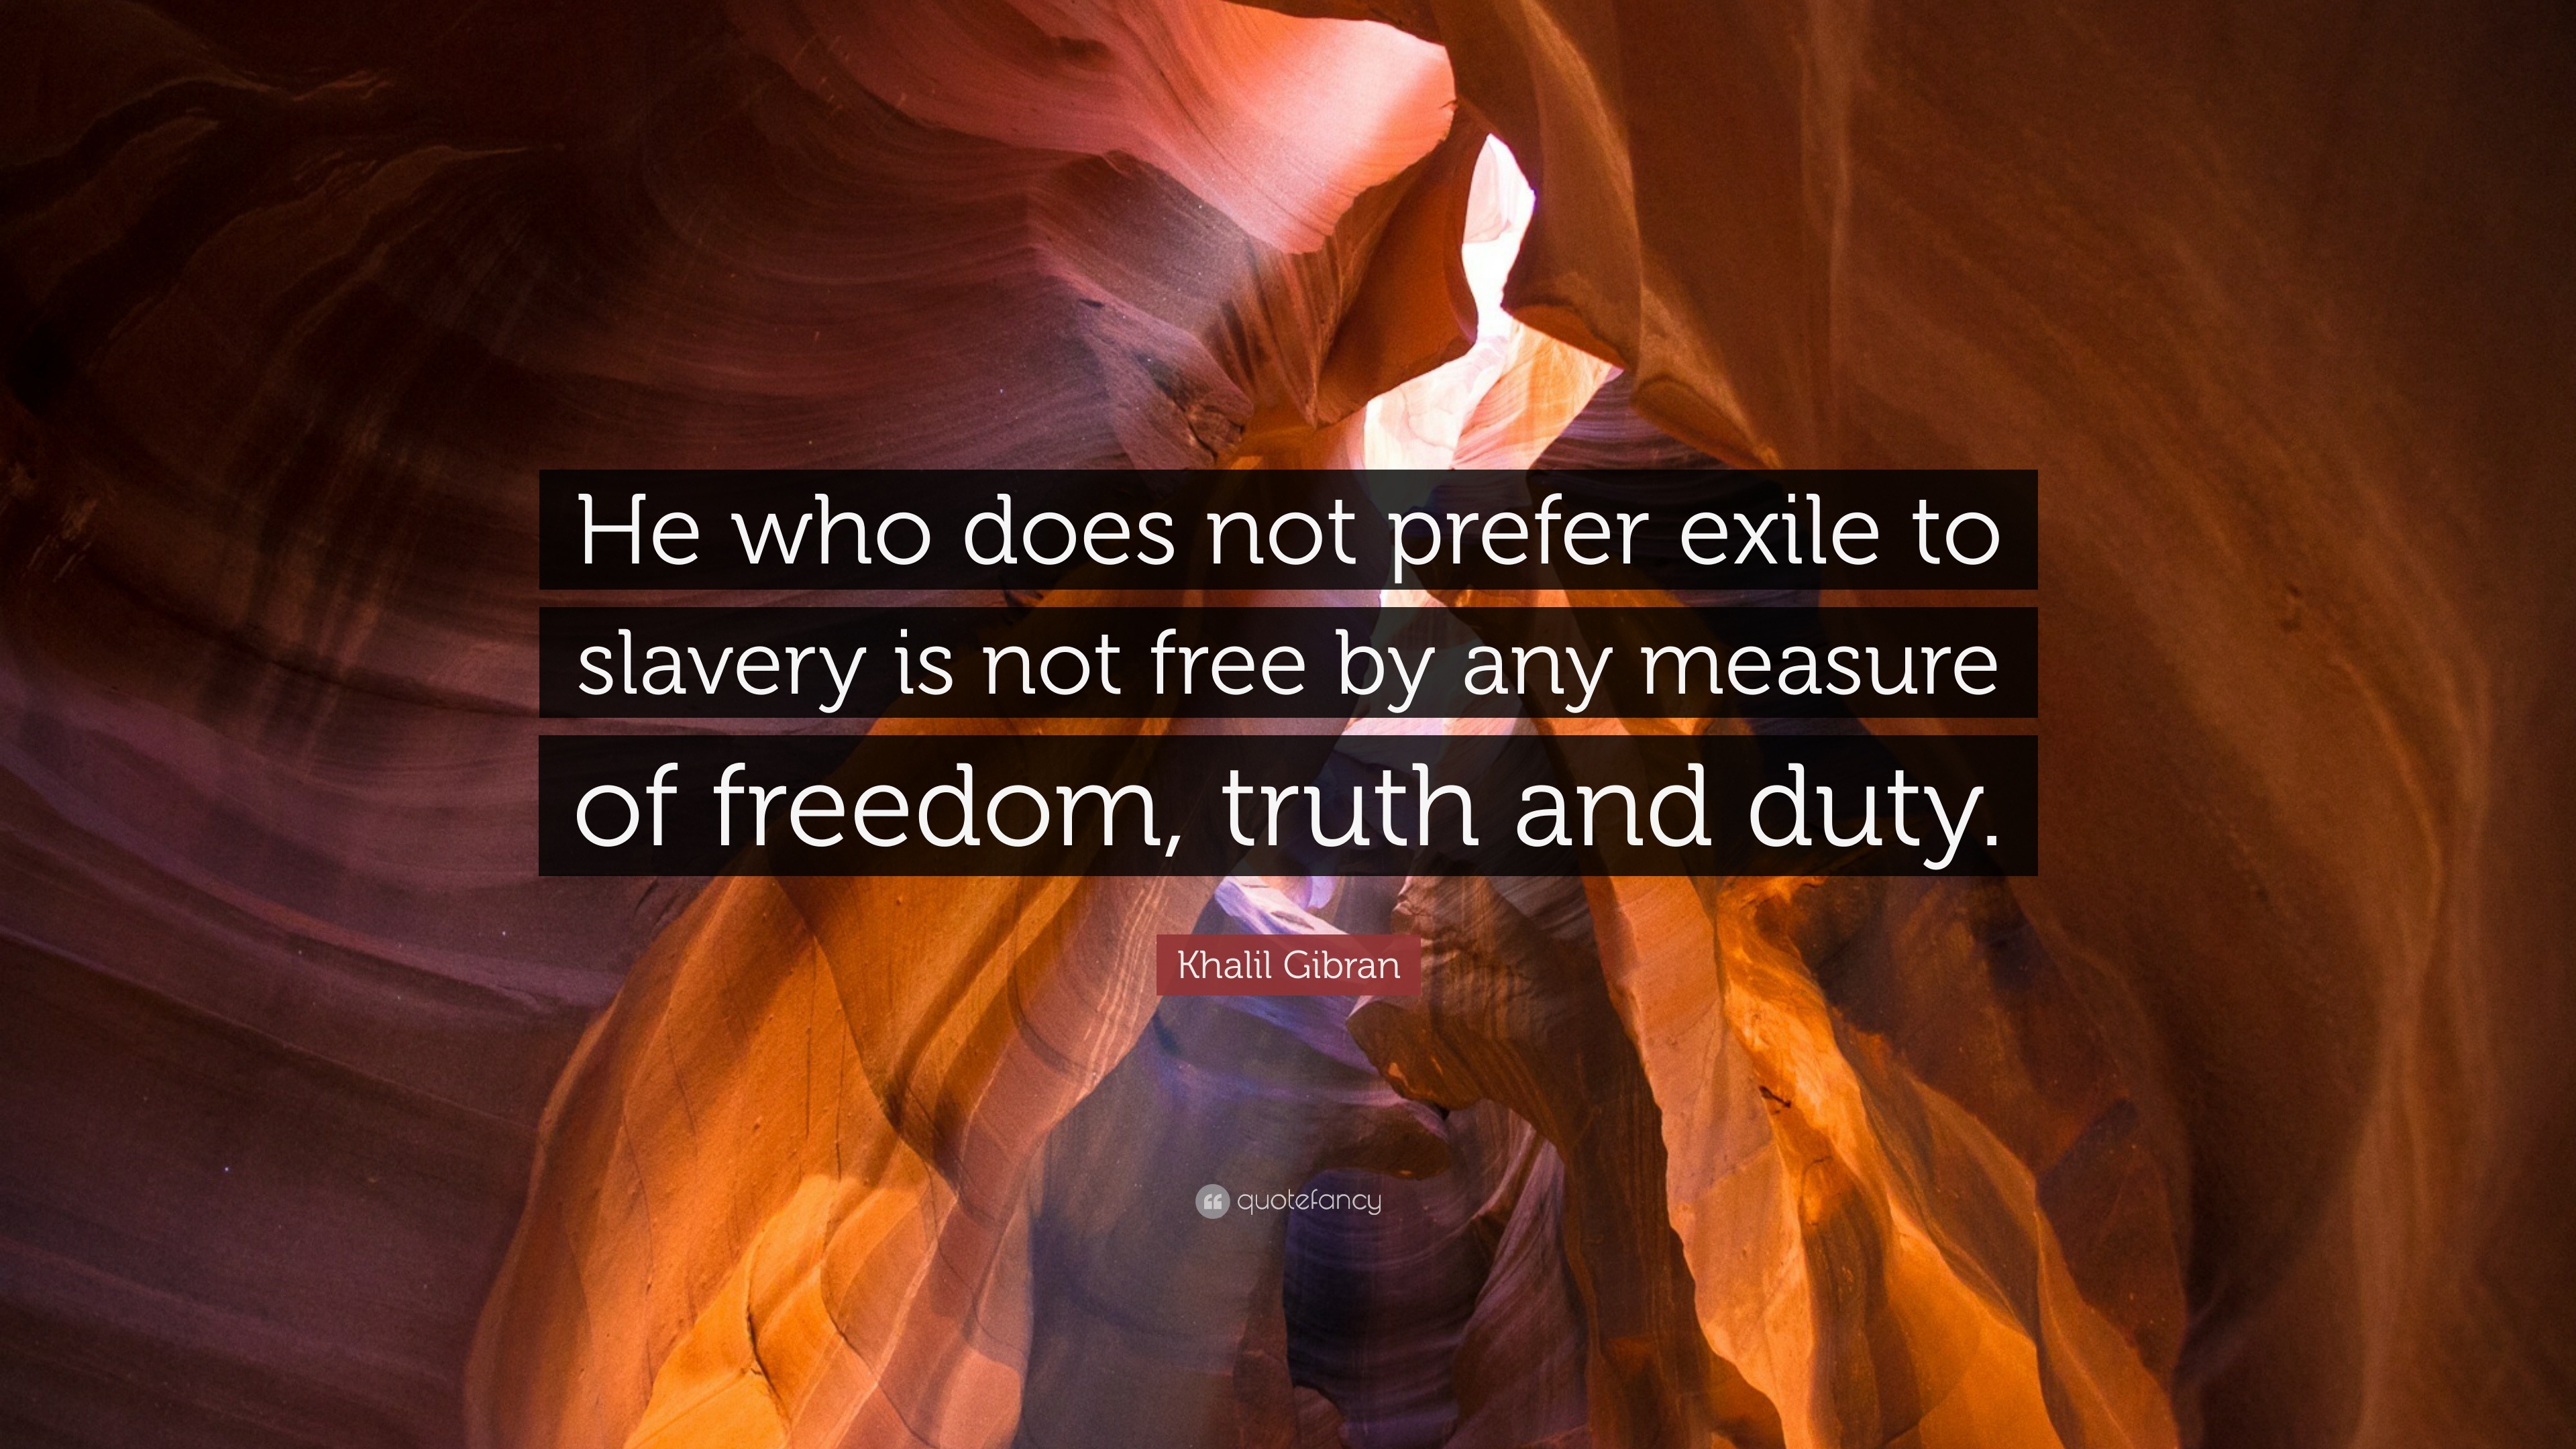 Khalil Gibran Quote: “He who does not prefer exile to slavery is not ...